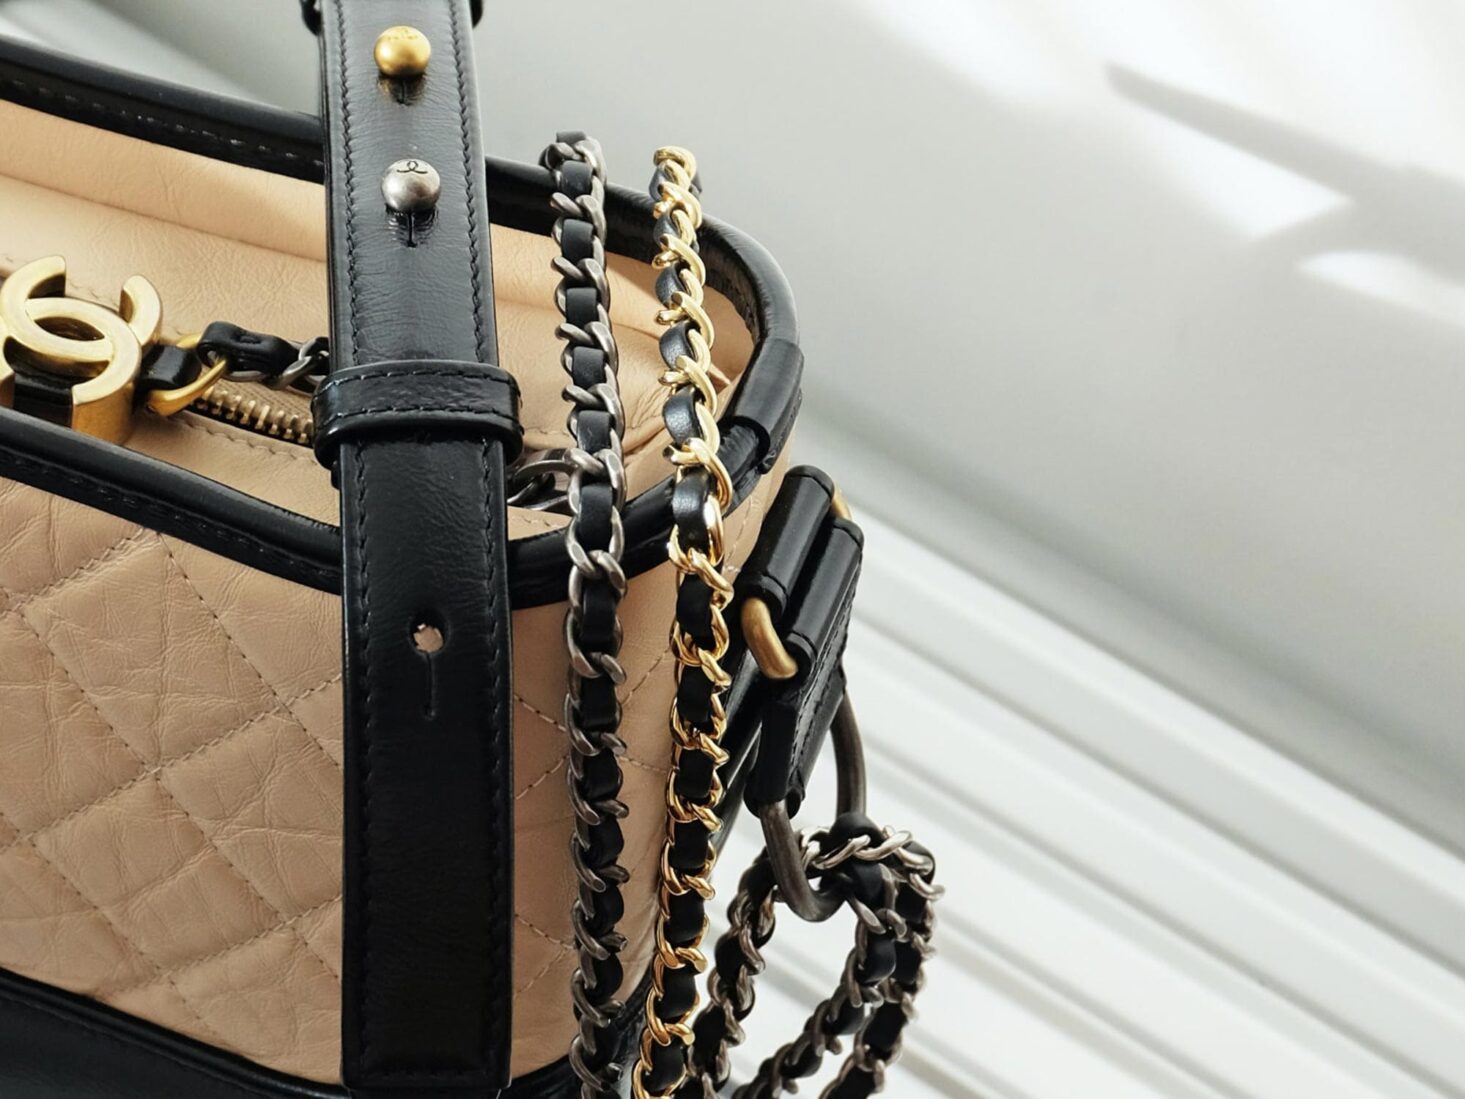 WE KNEW IT WAS COMING!! MORE LUXURY PRICE INCREASES… CHANEL, FENDI